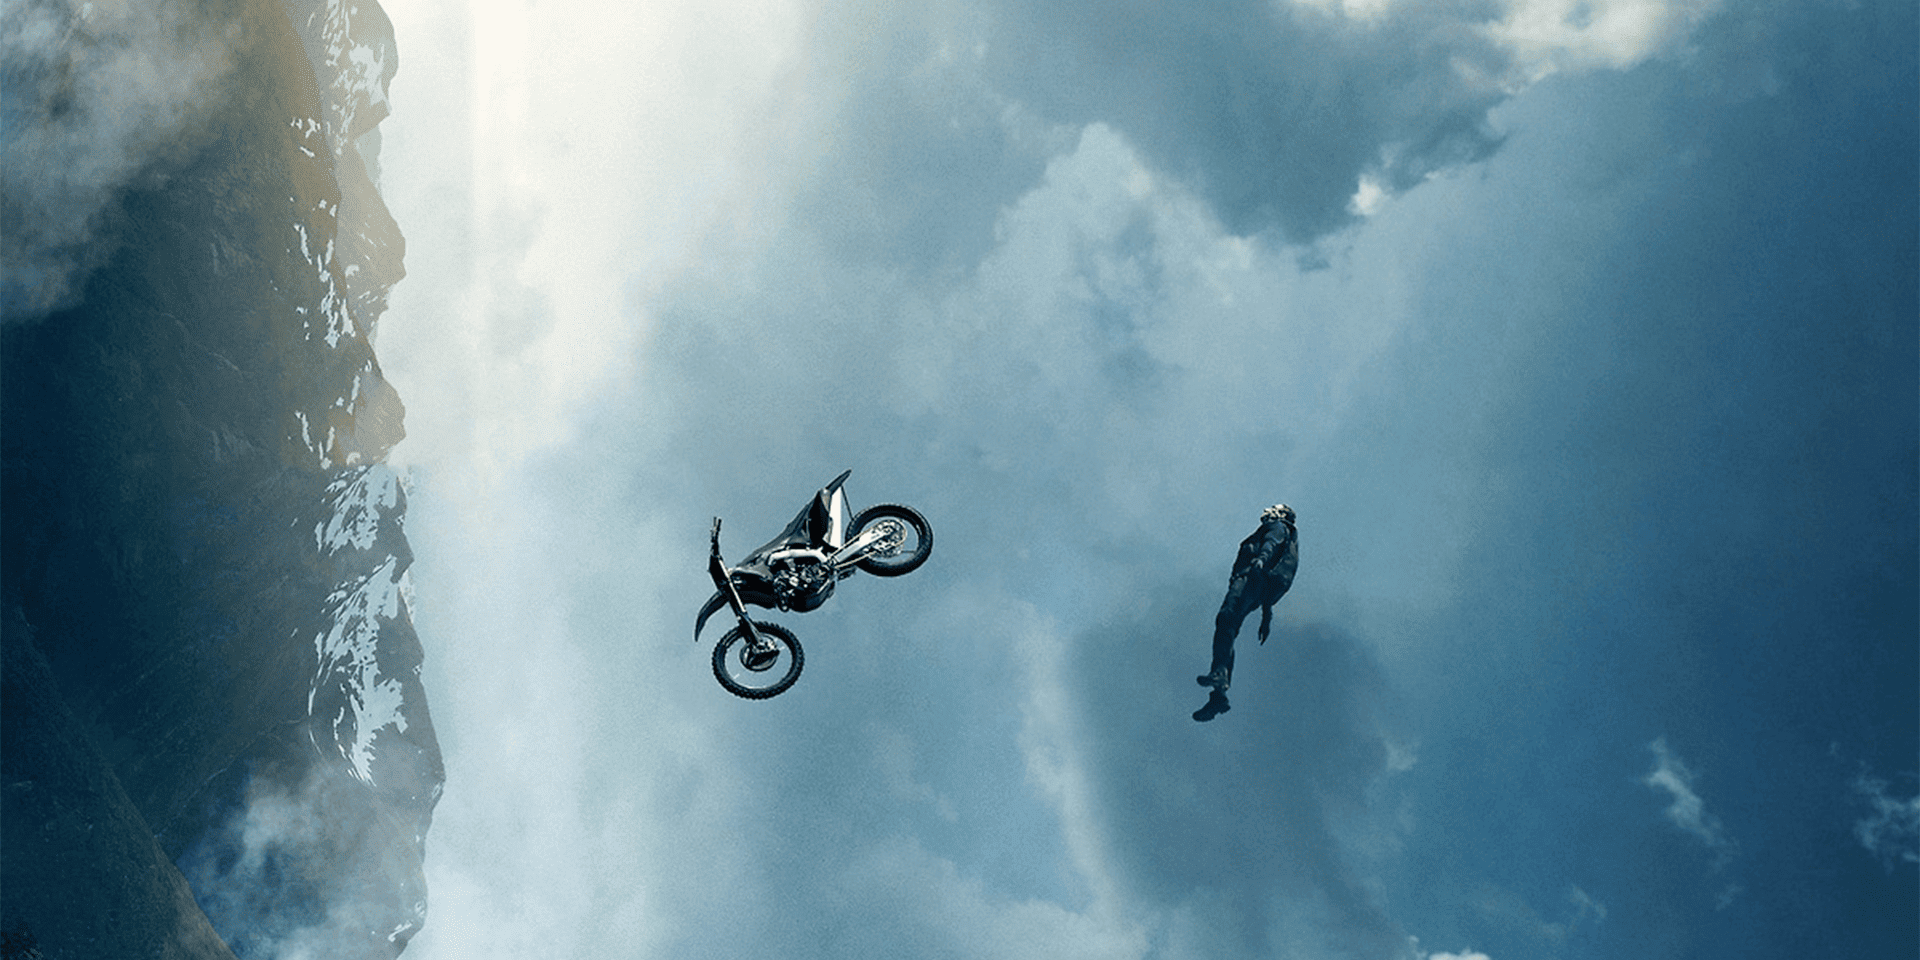 Tom Cruise performs his most daring stunt in the latest “Mission Impossible” movie in this image from Paramount Pictures